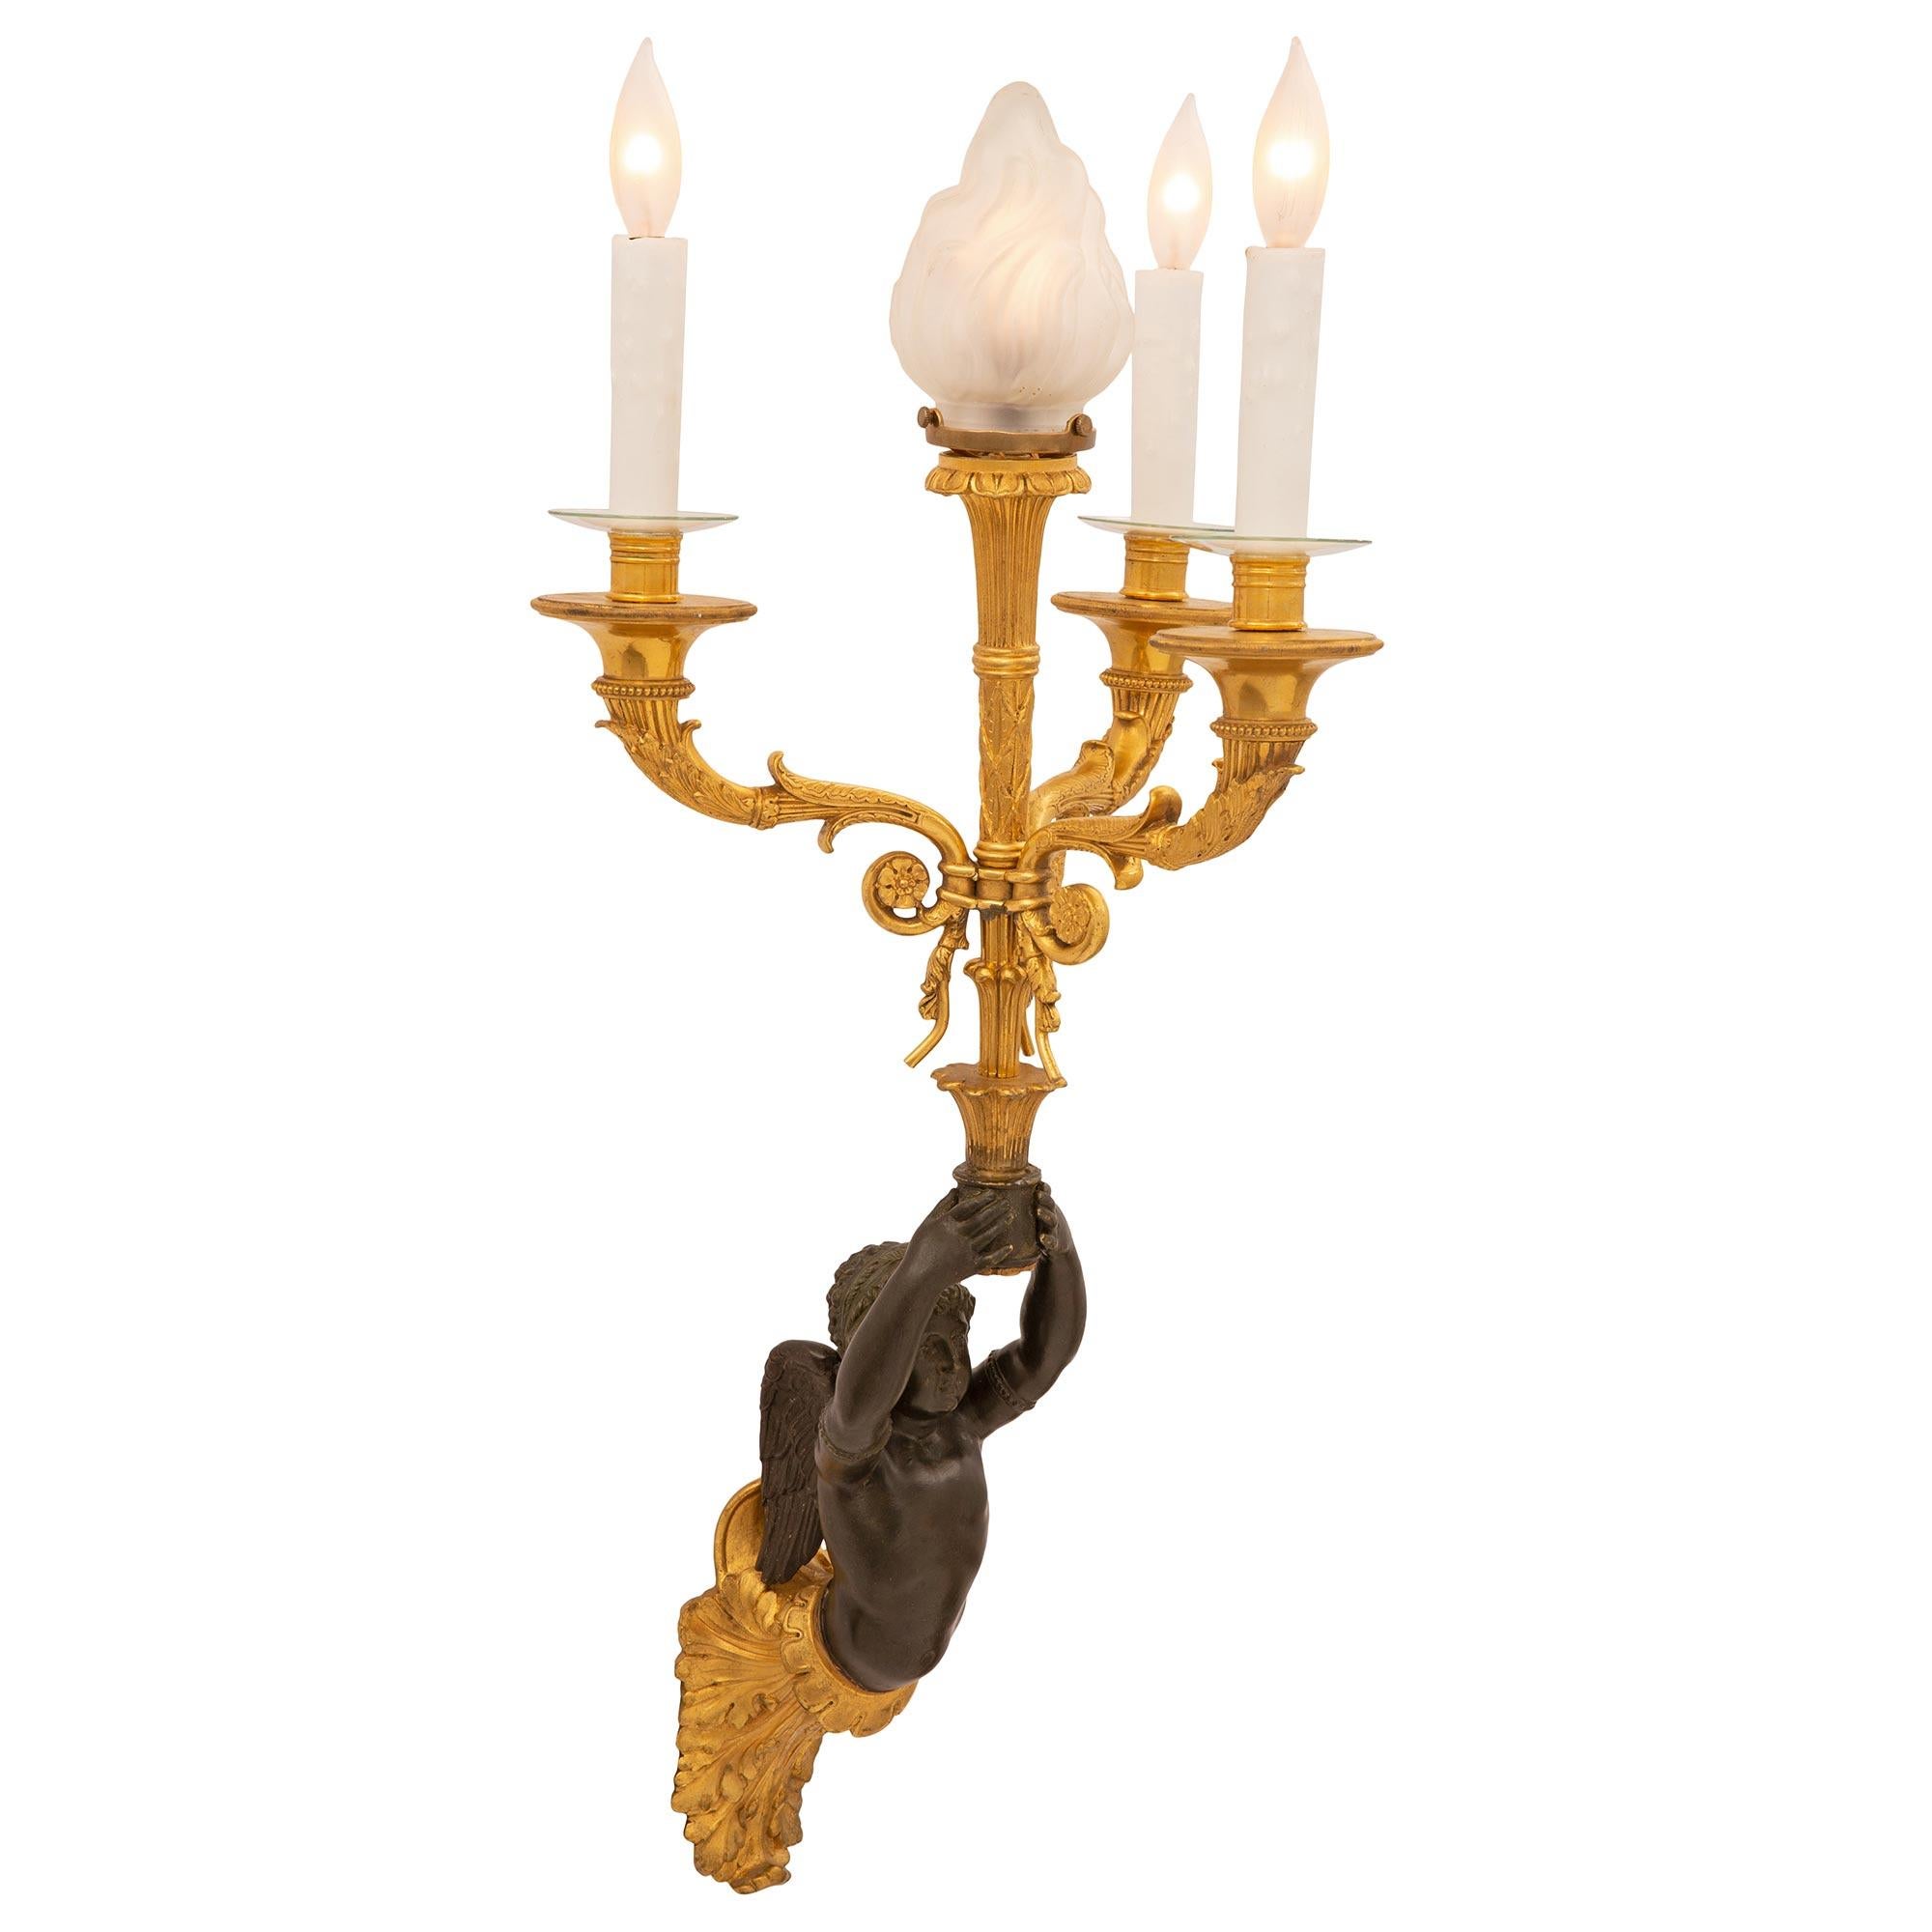 An outstanding pair of French 19th century Neo-Classical st. patinated bronze and ormolu sconces. Each four arm sconce is centered by a richly chased ormolu acanthus leaf backplate from where the charming and finely detailed patinated bronze cherubs